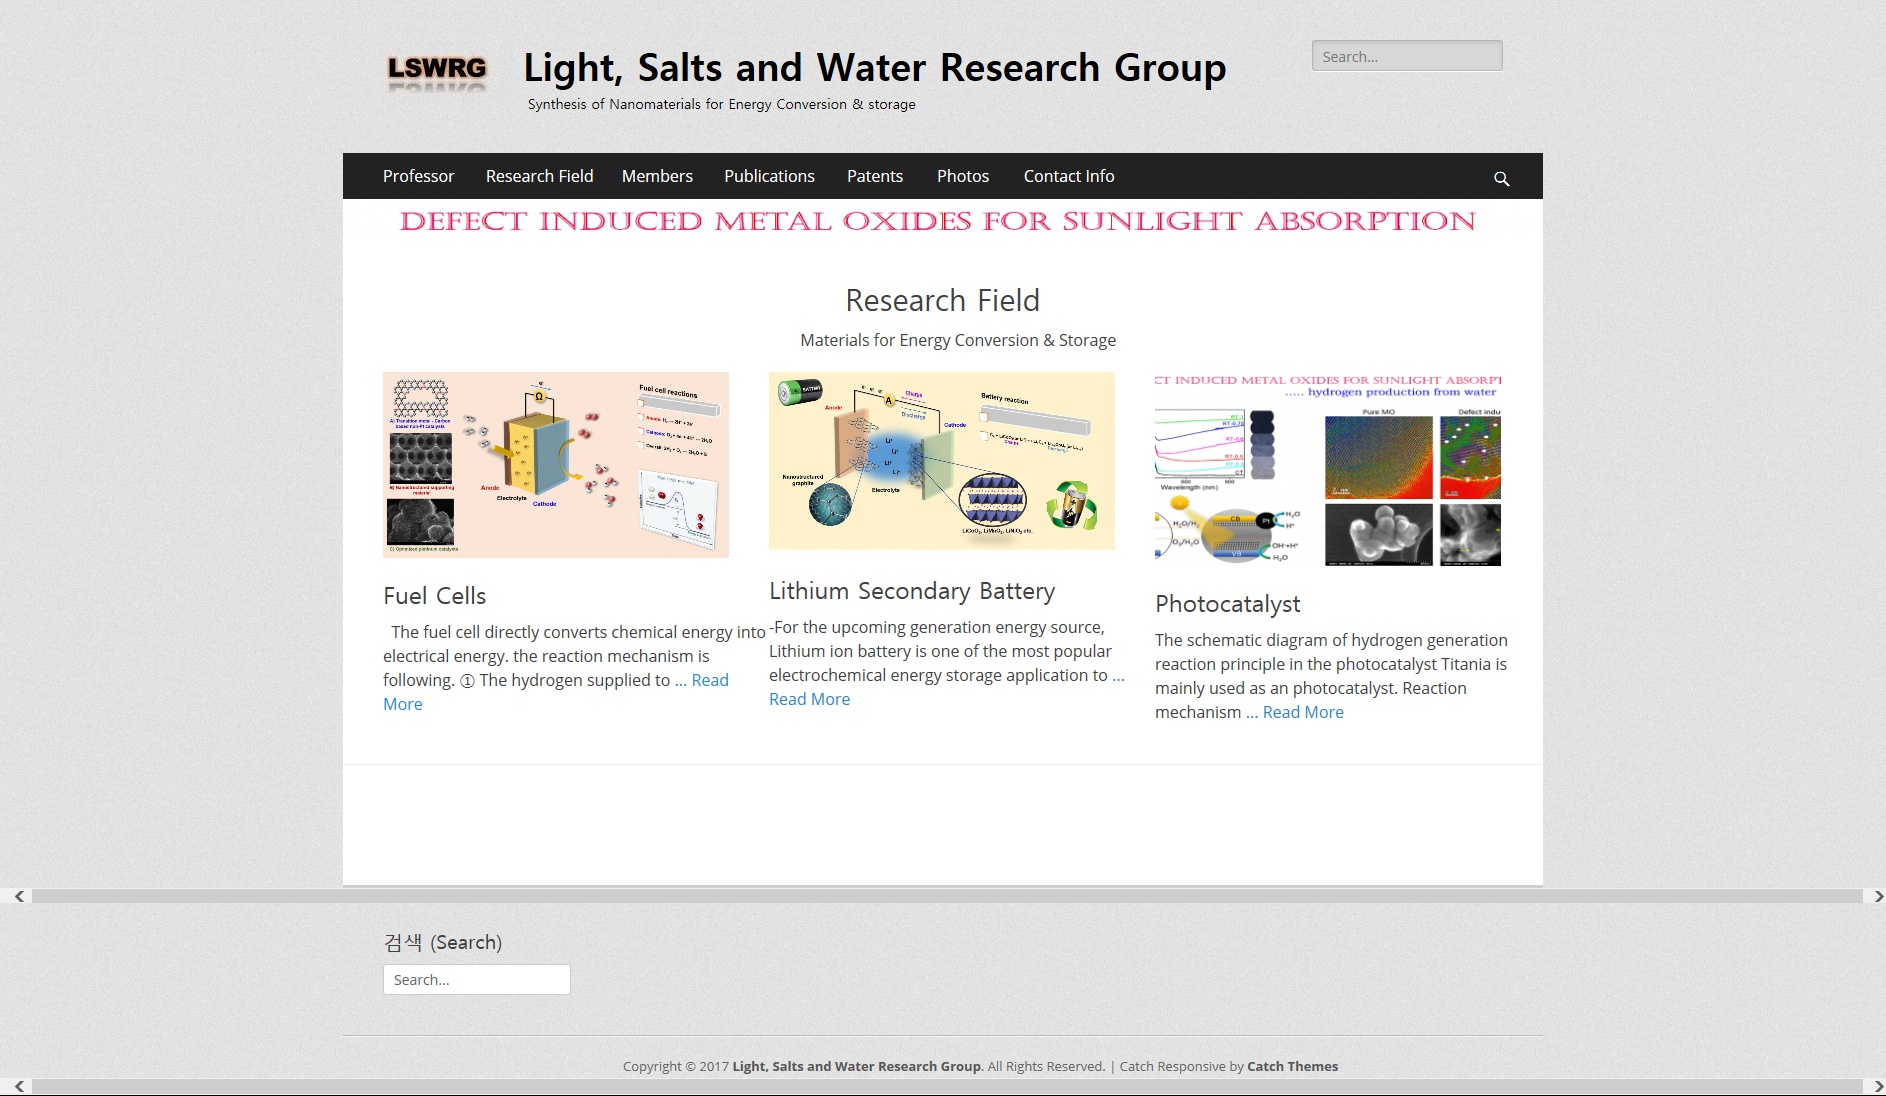 LSWRG Light, Salts and Water Research Group